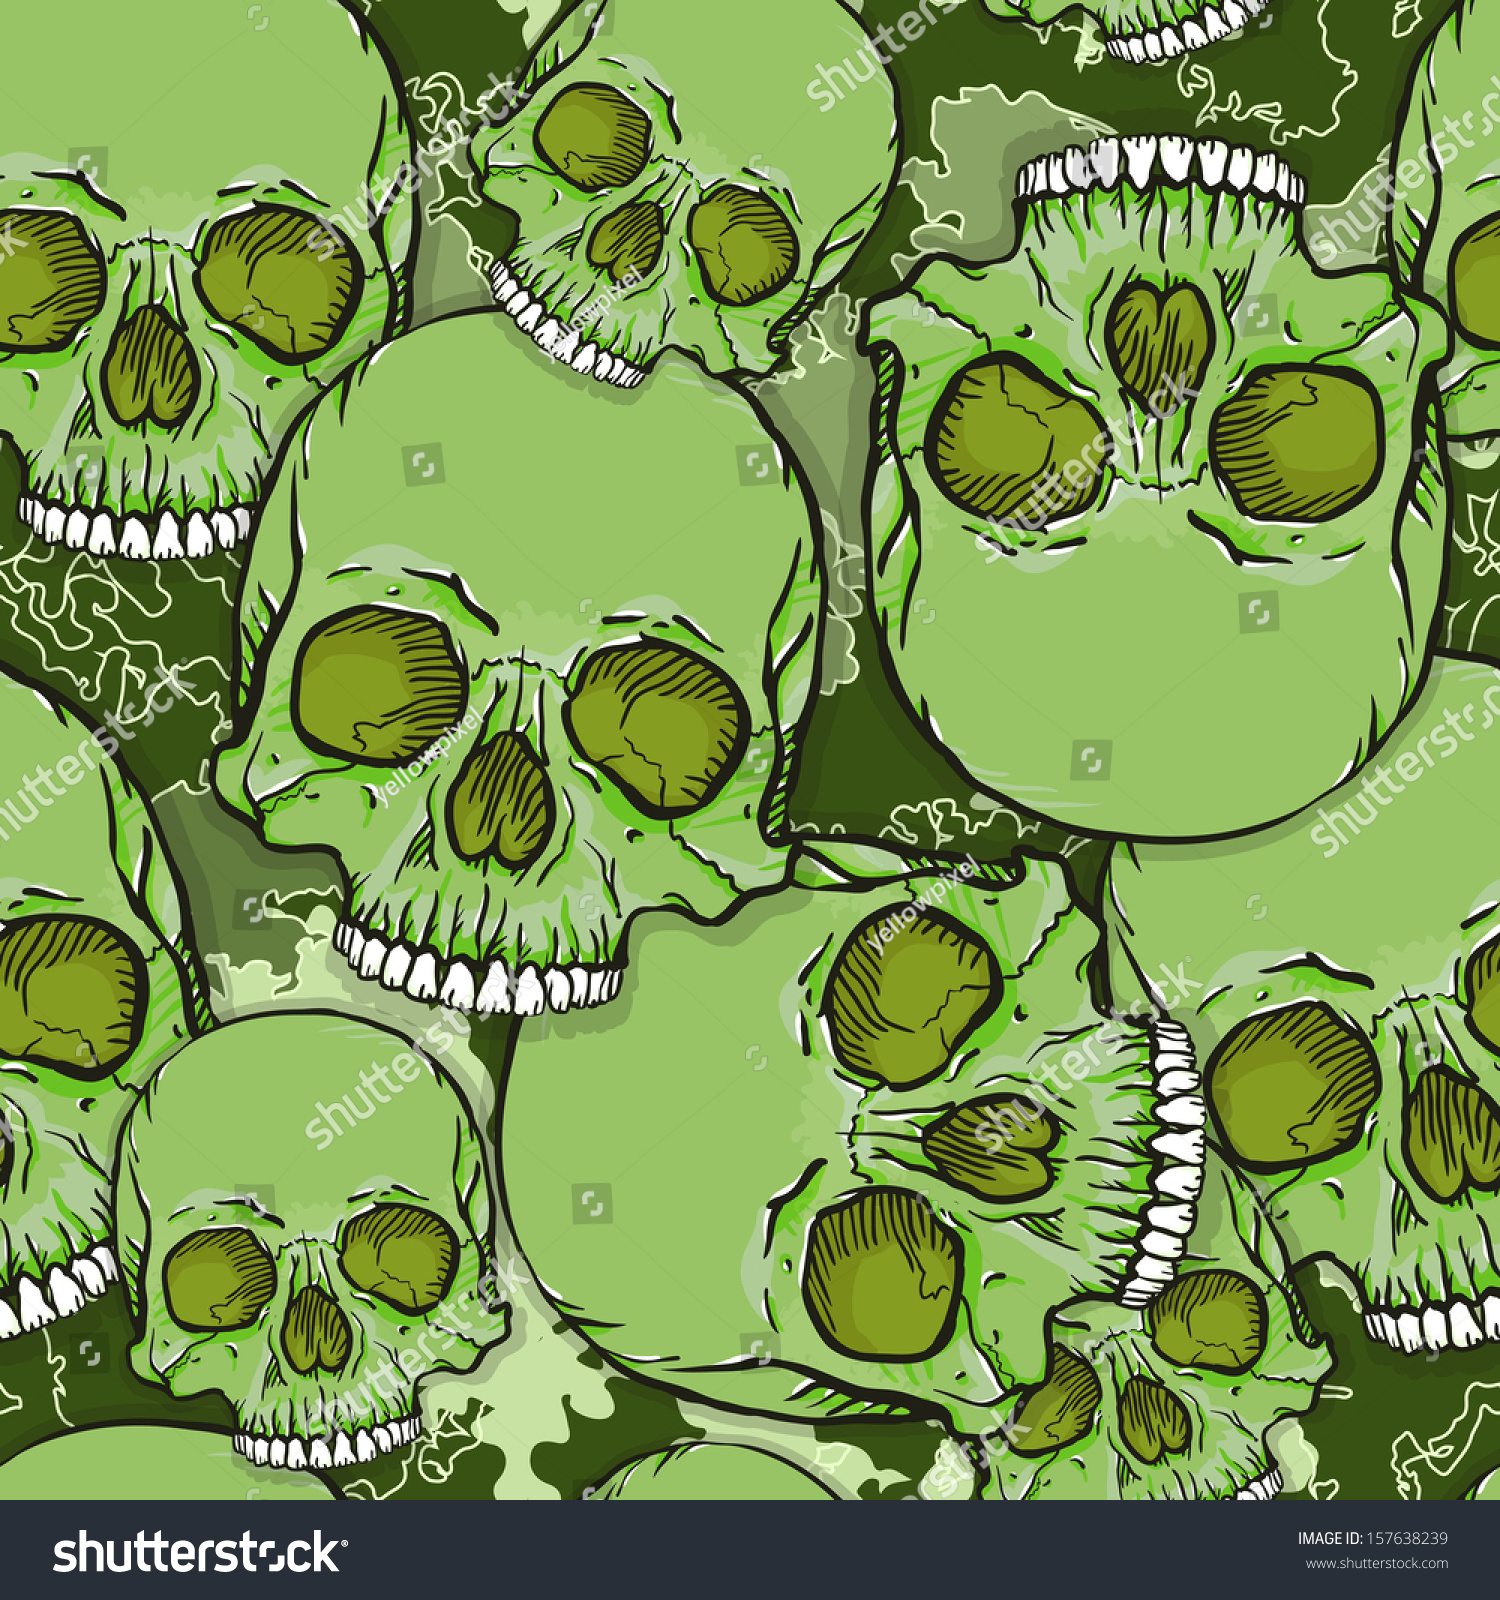 Camouflage Skull Background. Vector Seamless Pattern. - 157638239 ...